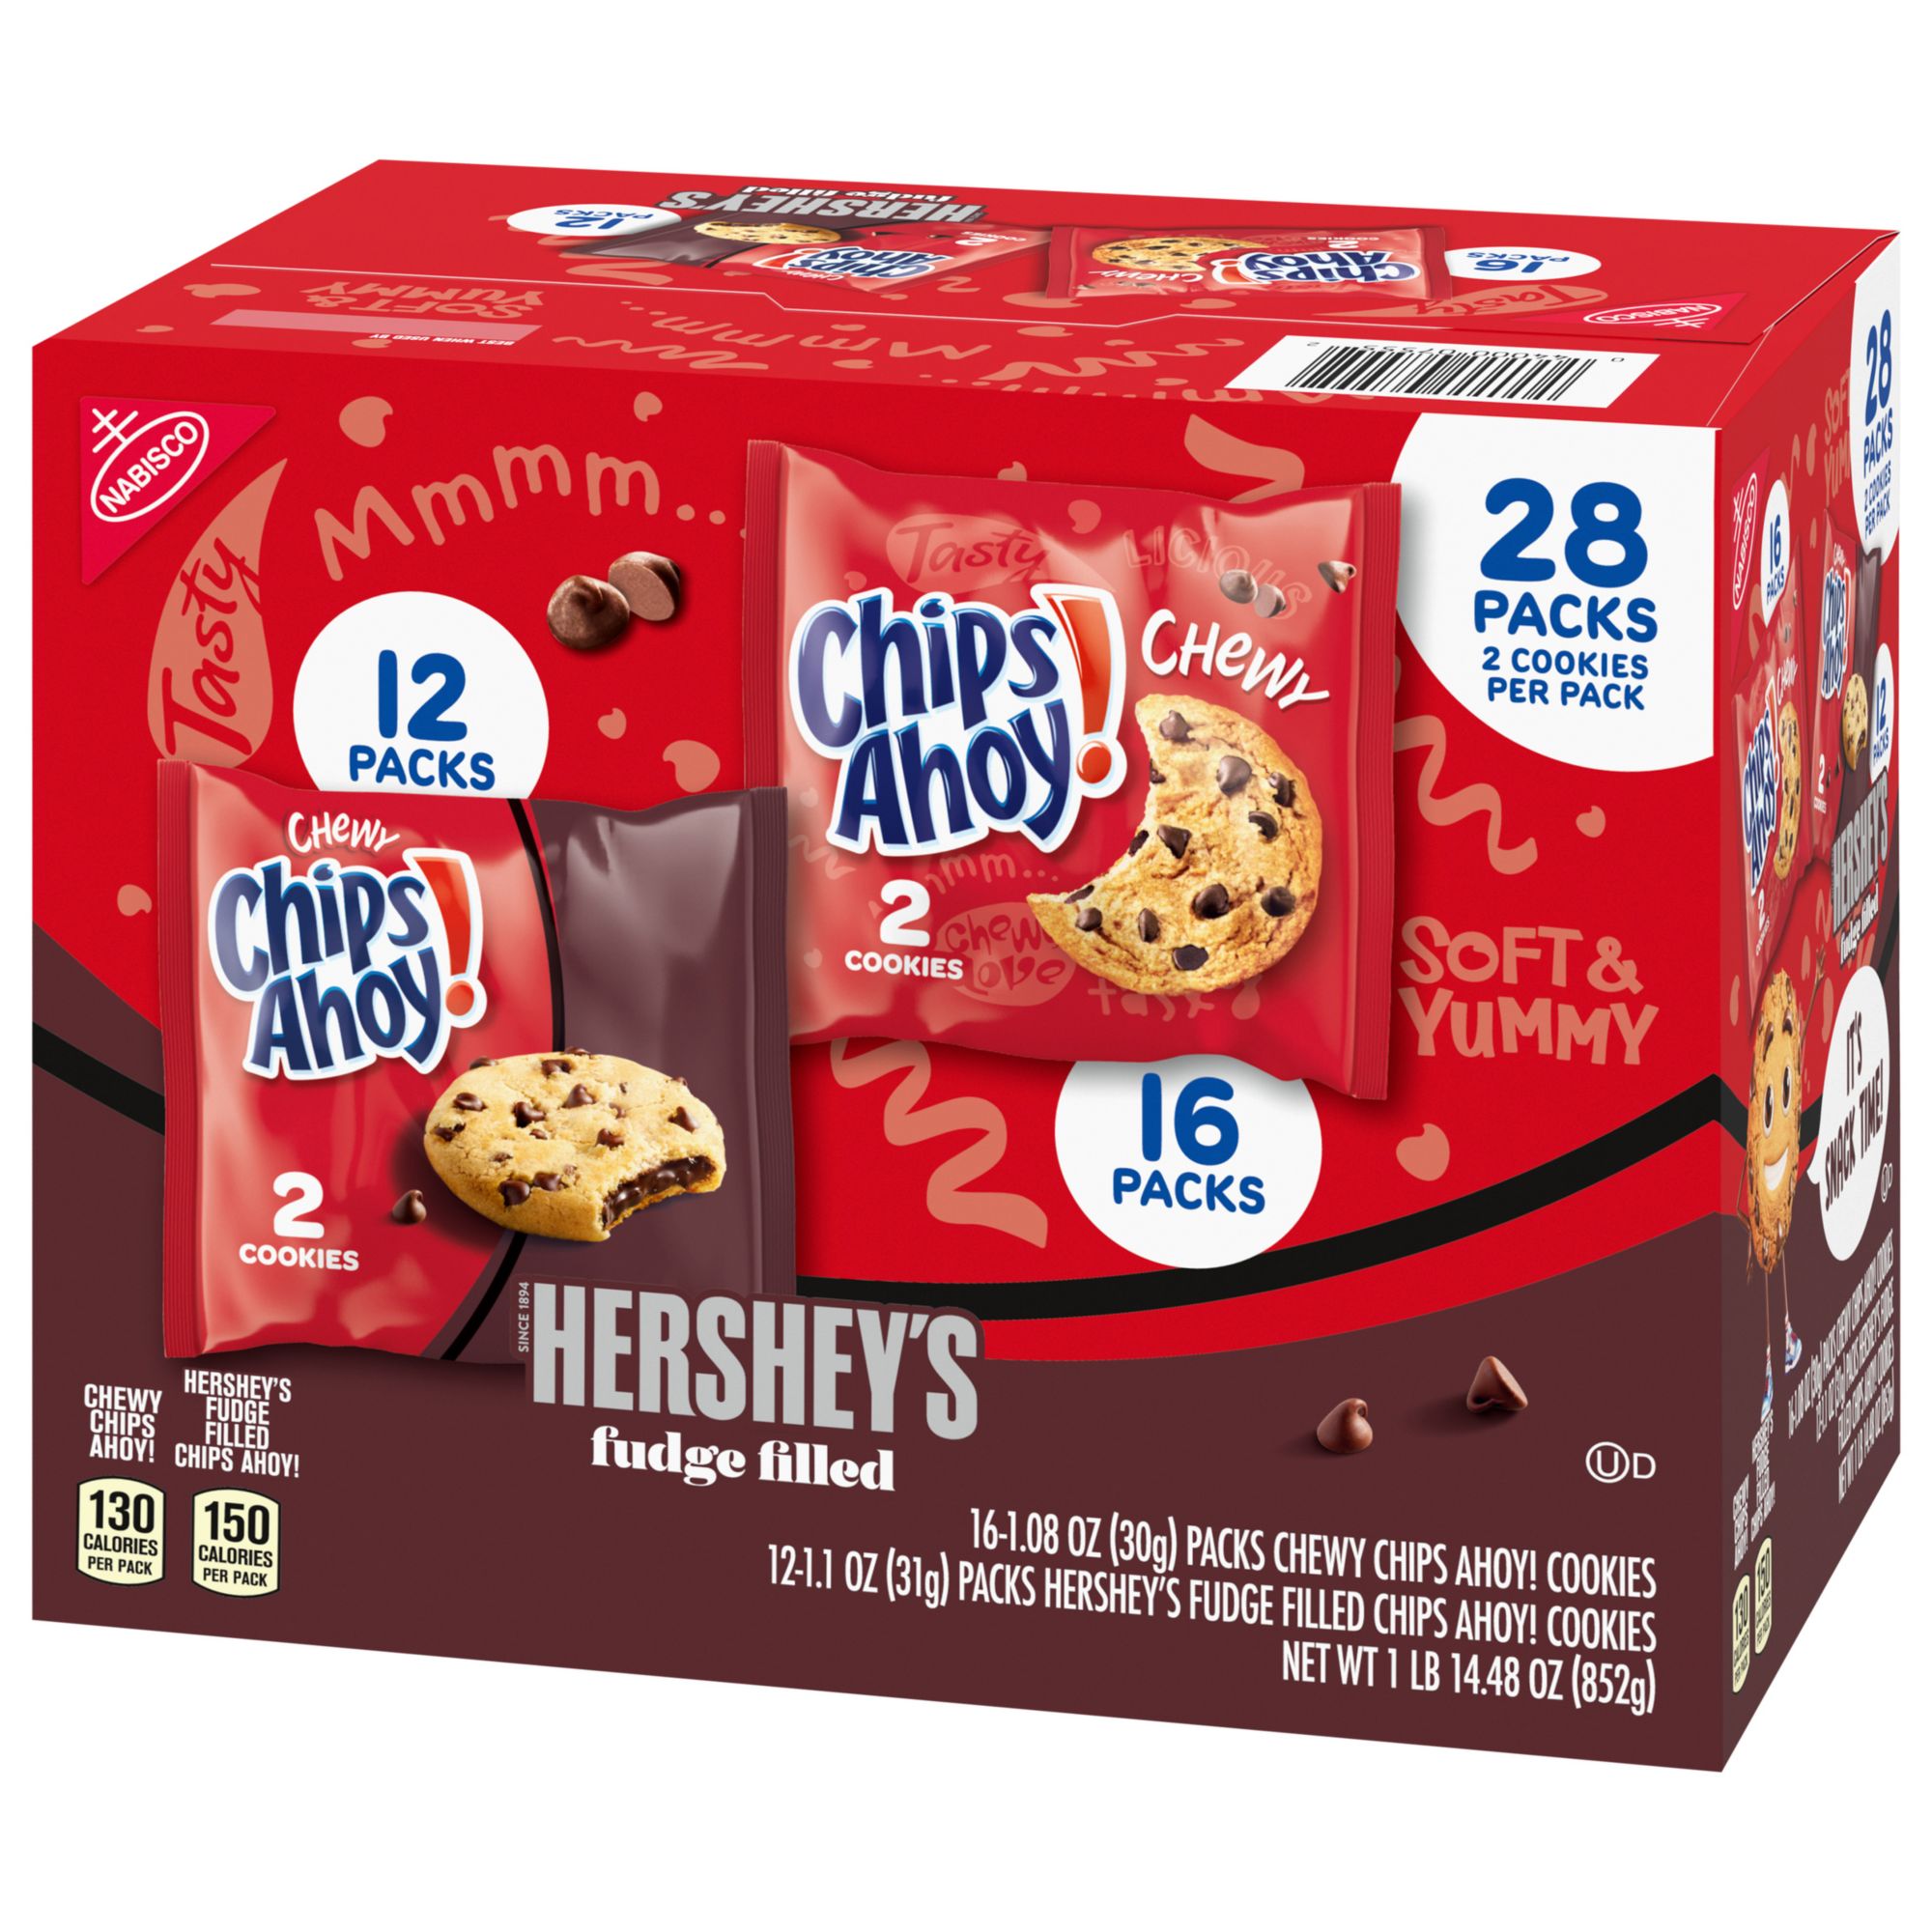 CHIPS AHOY! Hershey's Milk Chocolate Chip Cookies, Family Size, 14.48 oz